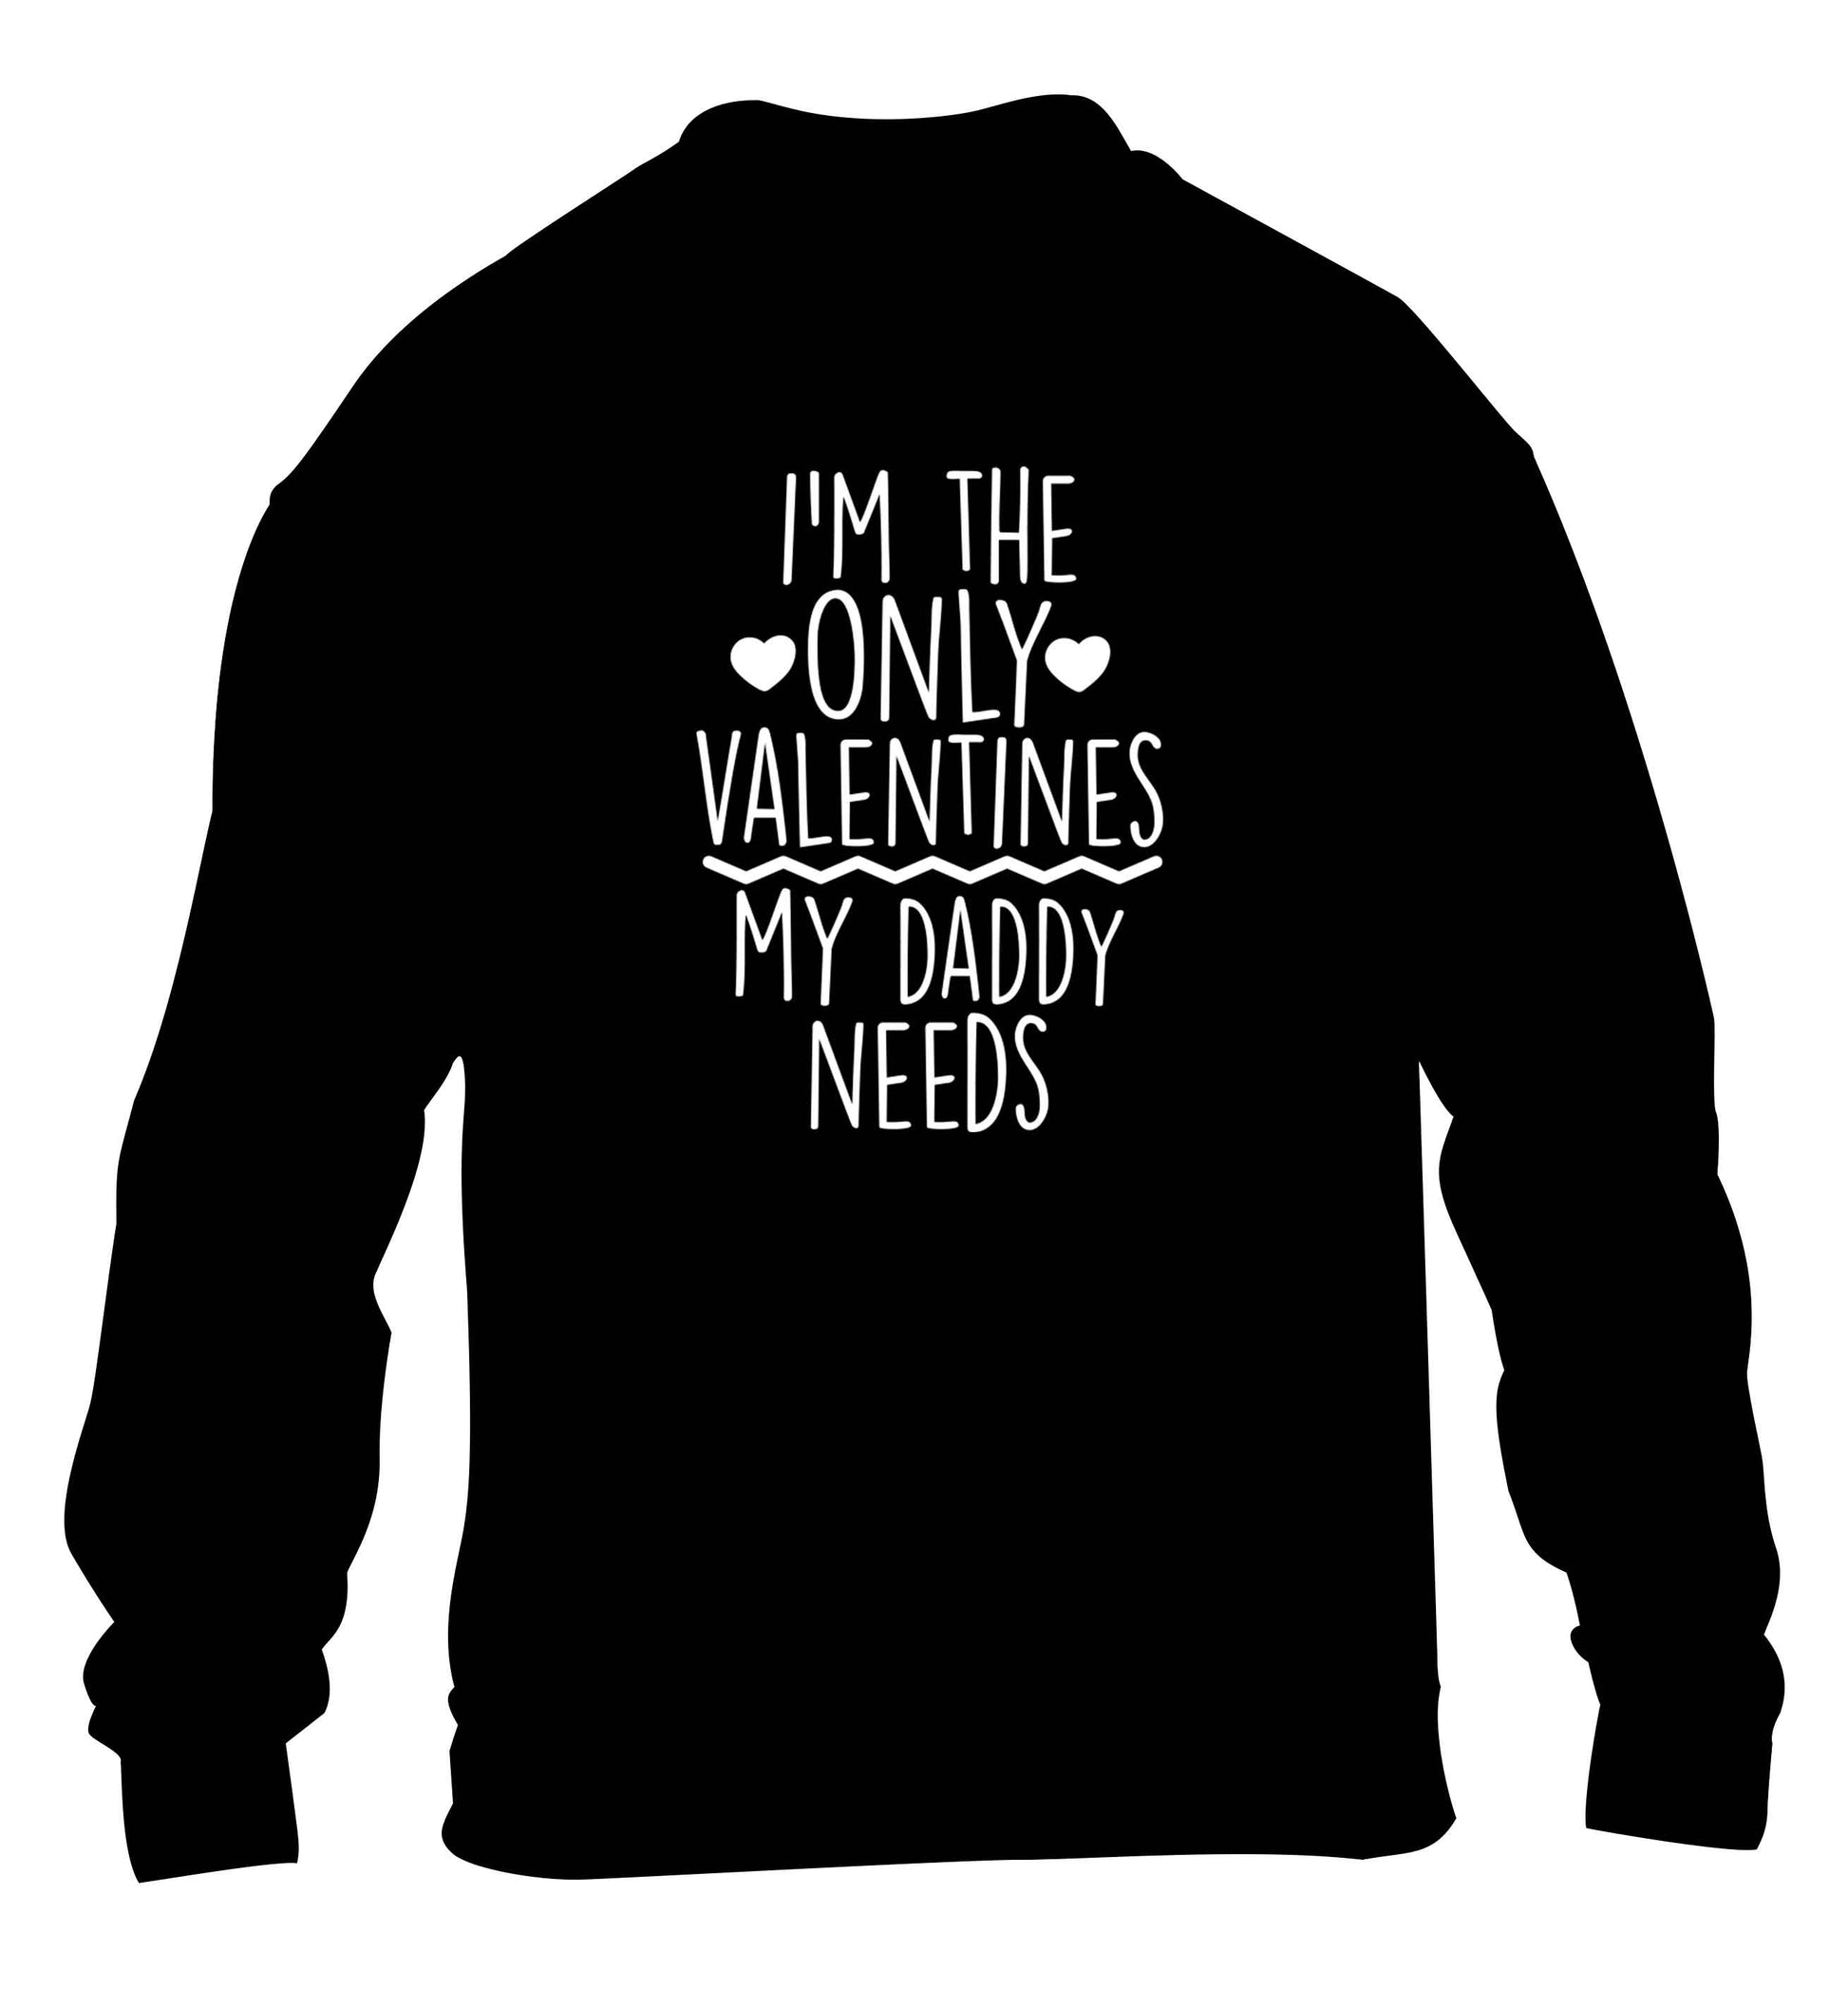 I'm the only valentines my daddy needs children's black sweater 12-13 Years